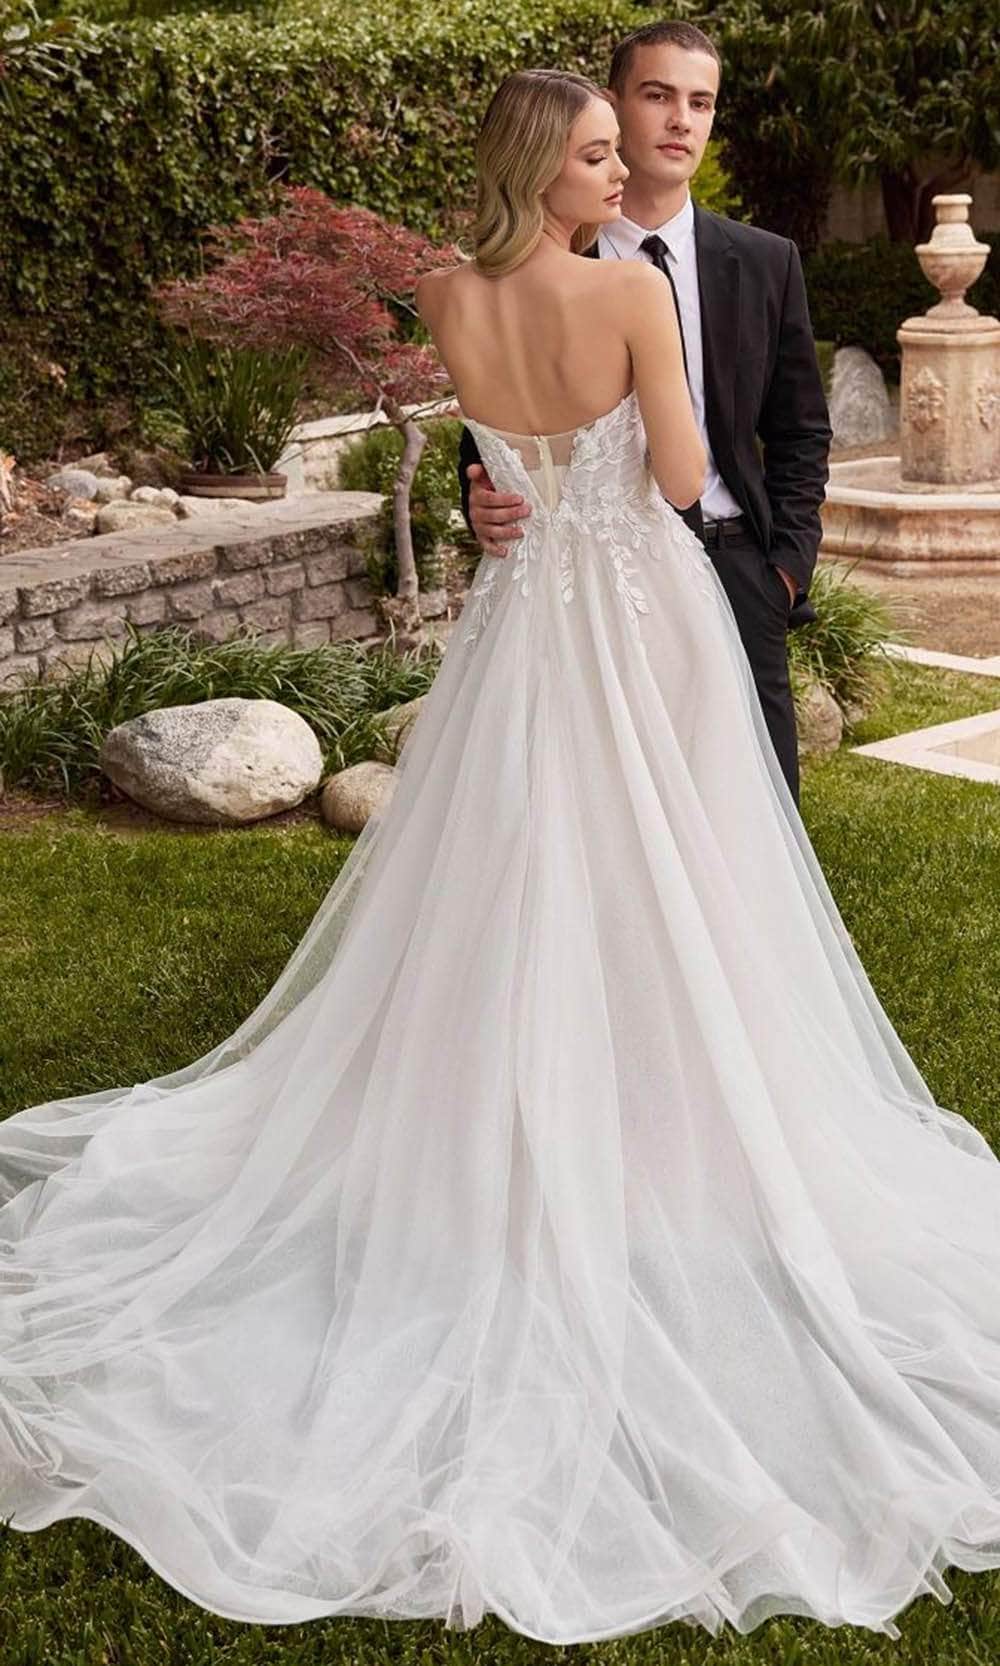 Ladivine CD859W - Tulle Bridal Gown